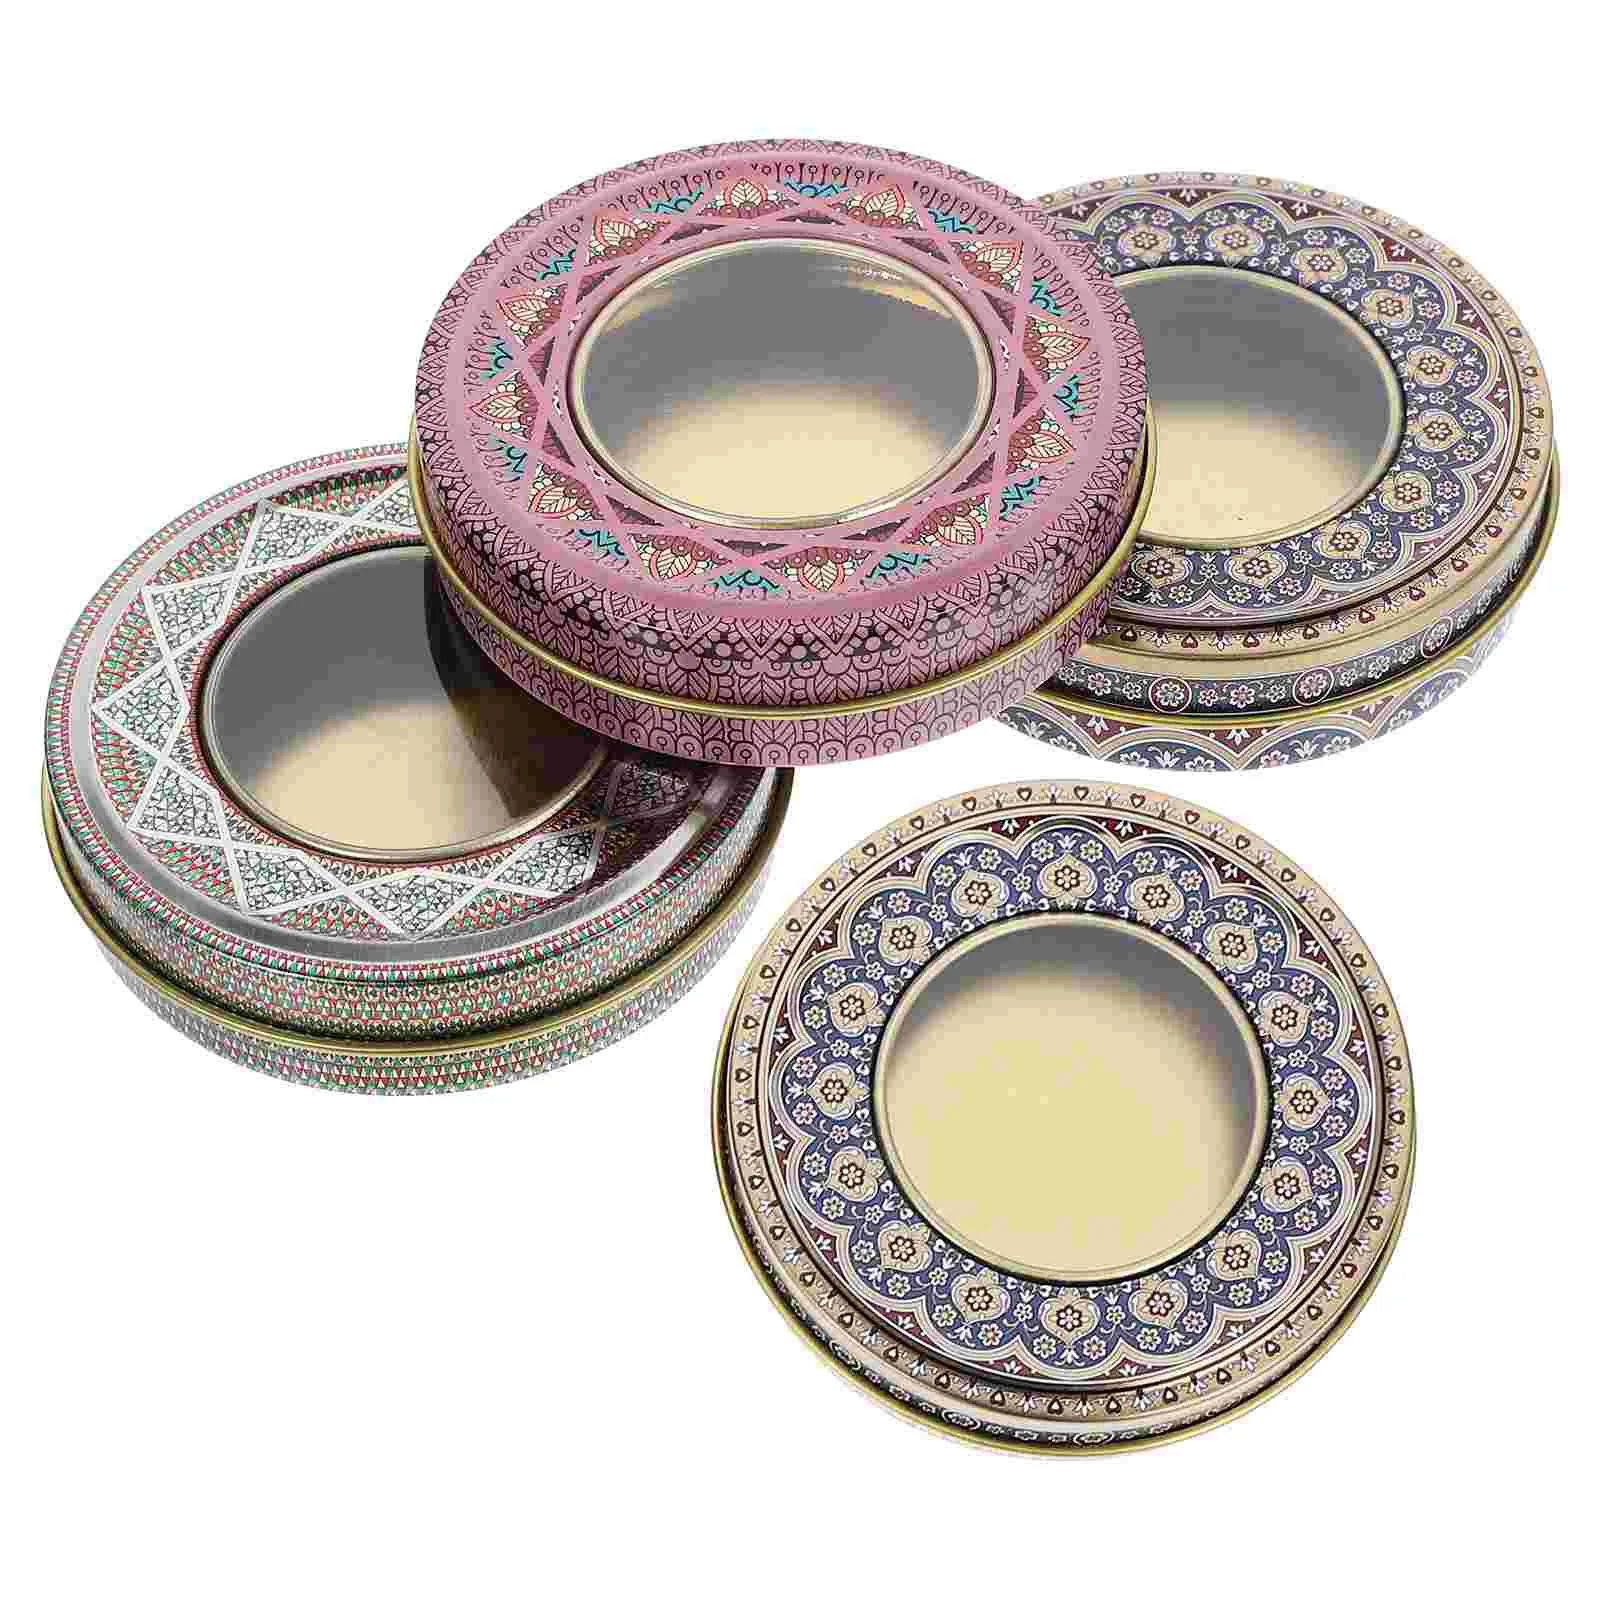 

4 Pcs Saffron Tin Box Iron Canisters Storage Containers Metal Sealed Jar Durable Small Travel Candy Jewelry Case